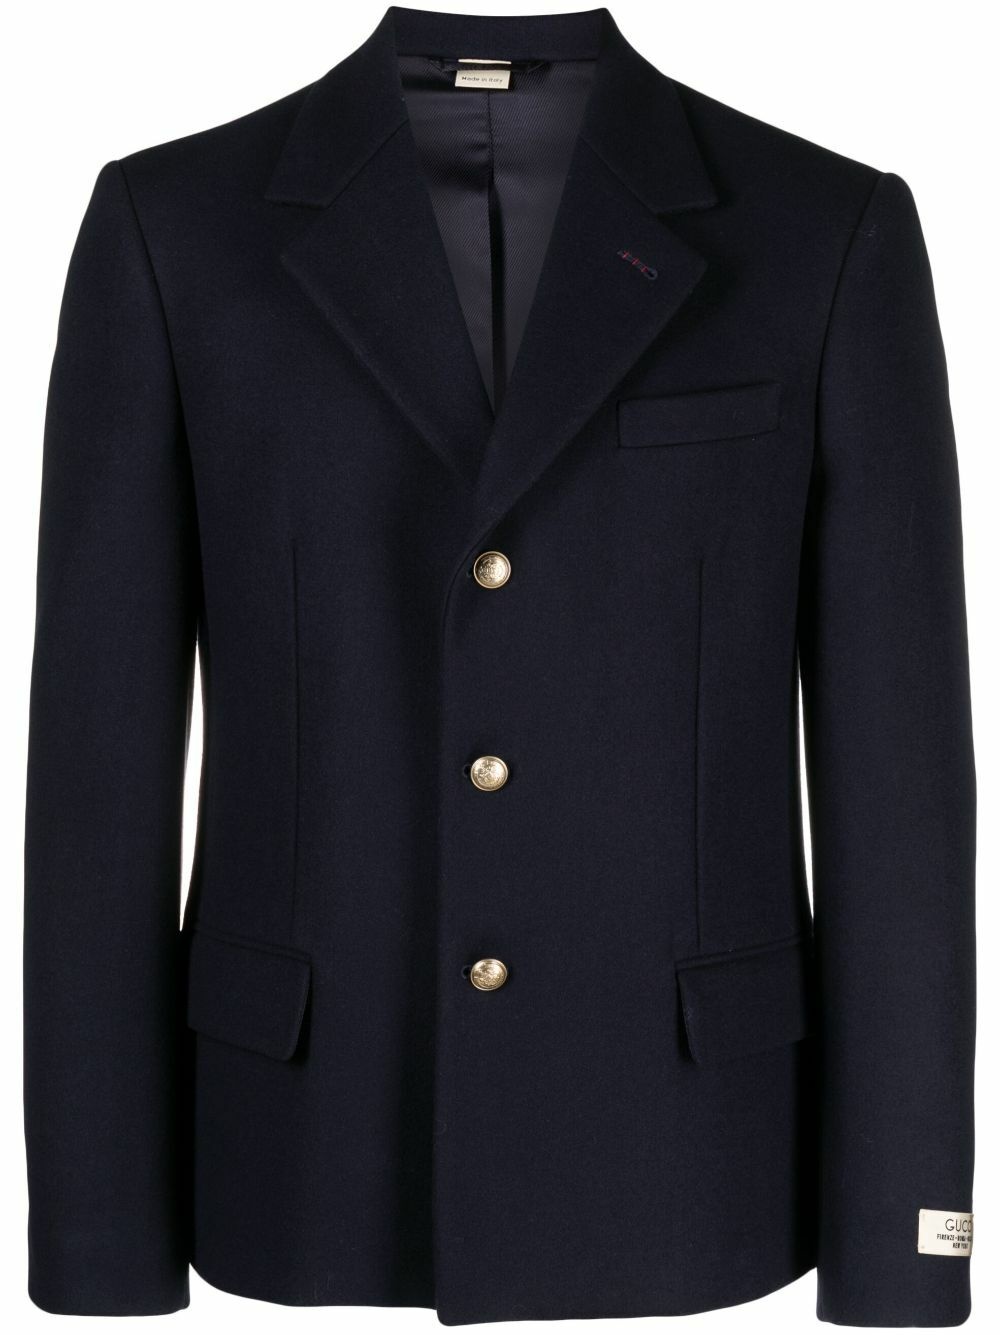 GUCCI - Wool Single-breasted Jacket Gucci